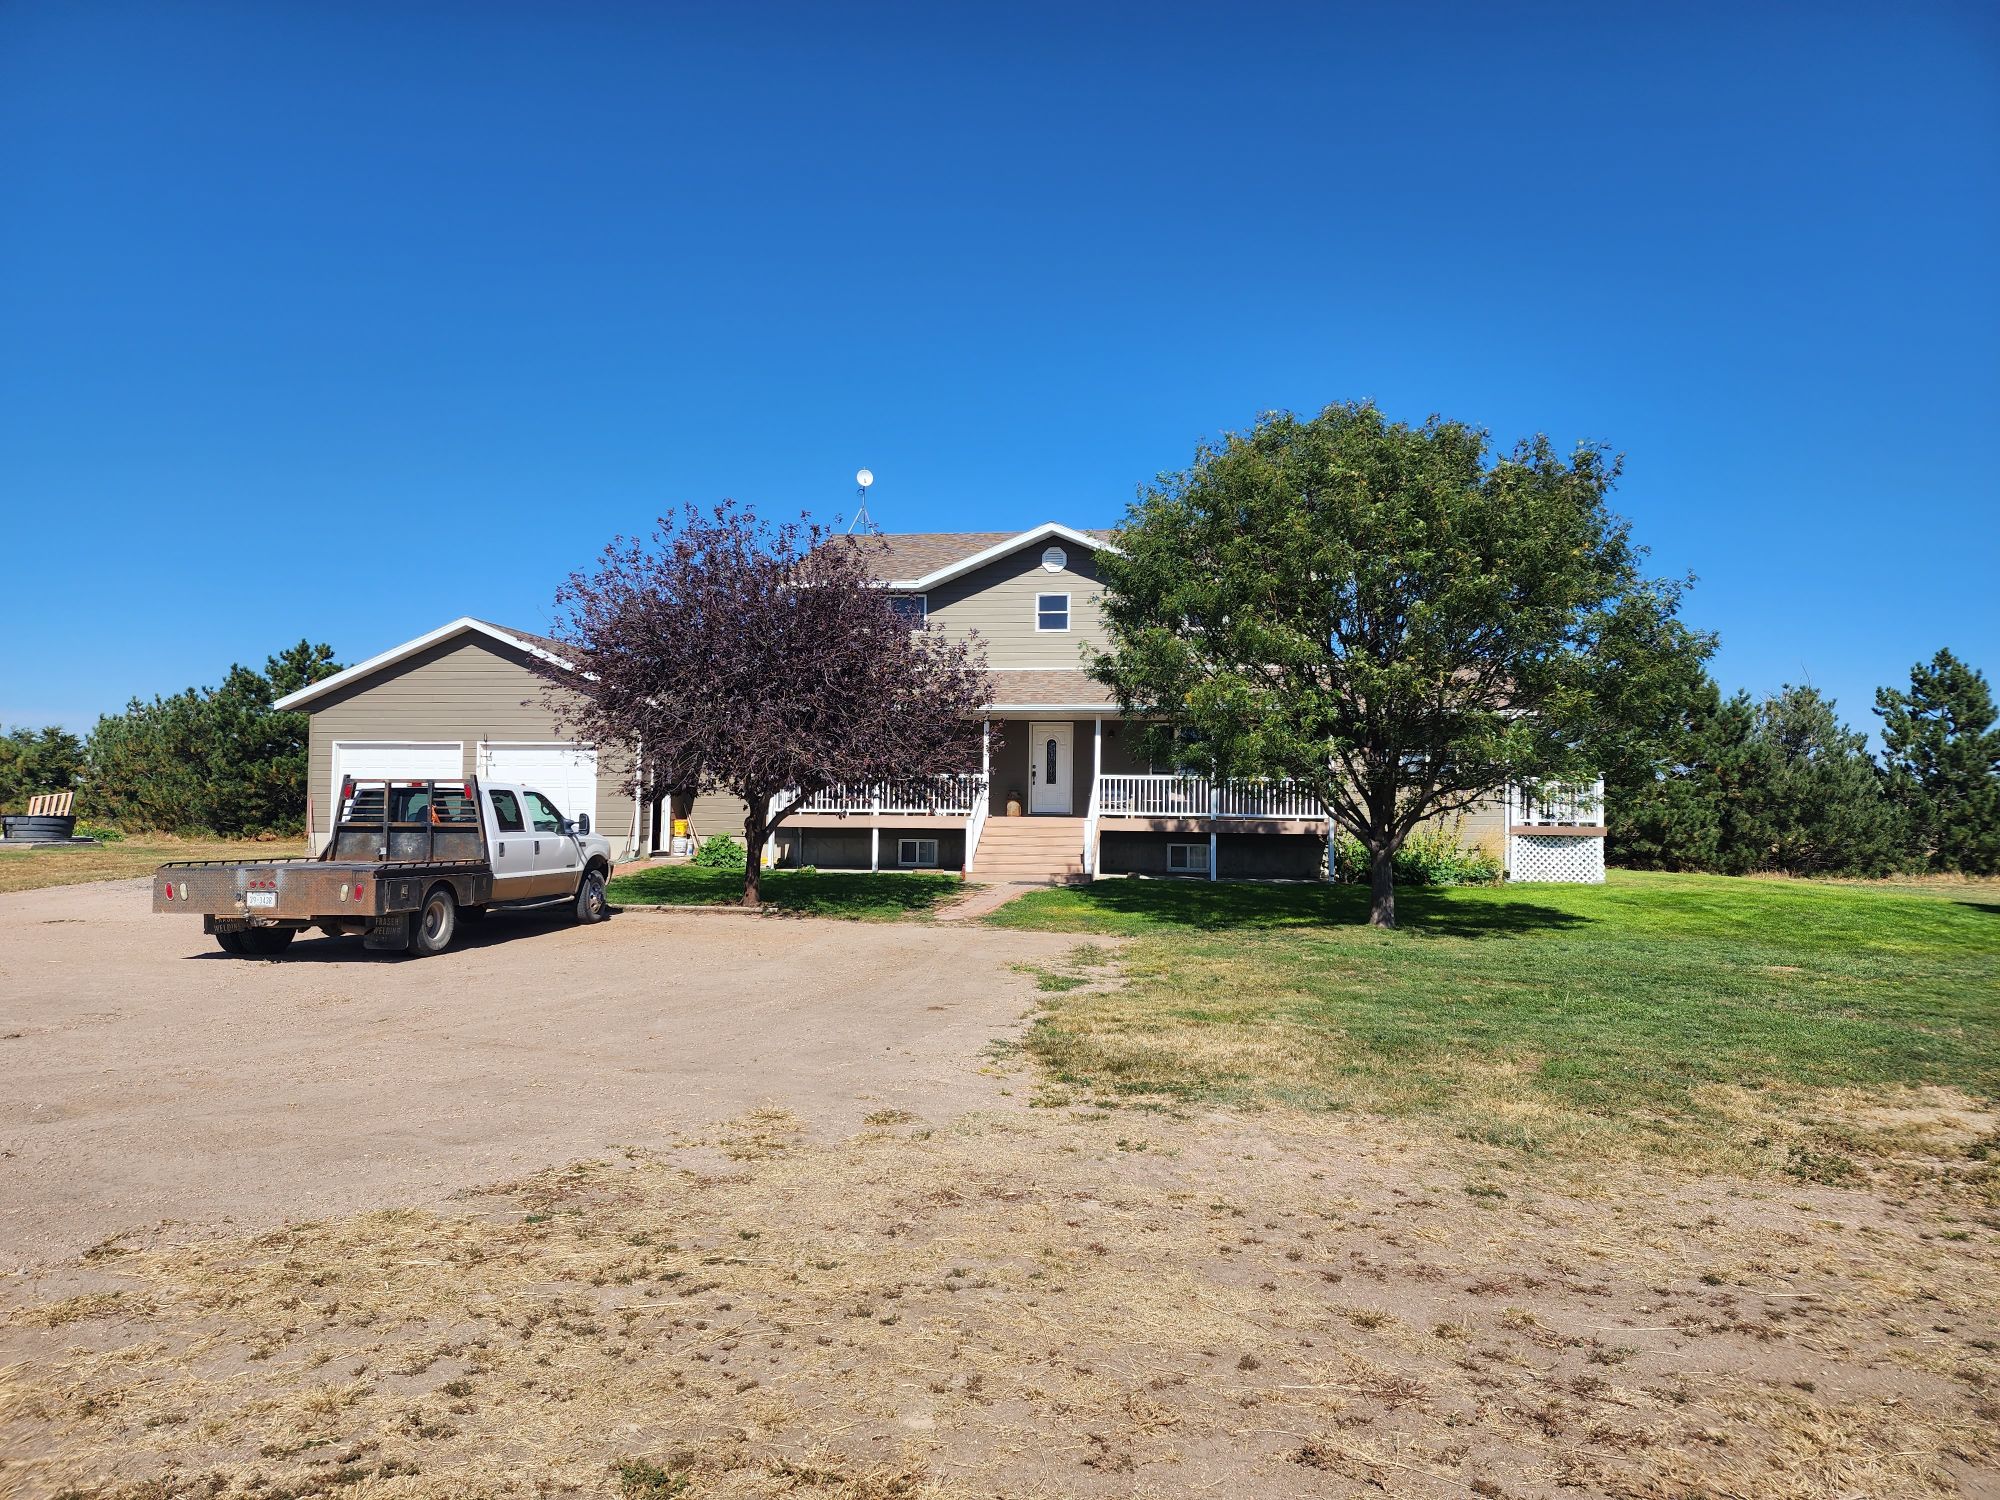 Sidney Acreage - Sidney, NE Home and Land For Sale